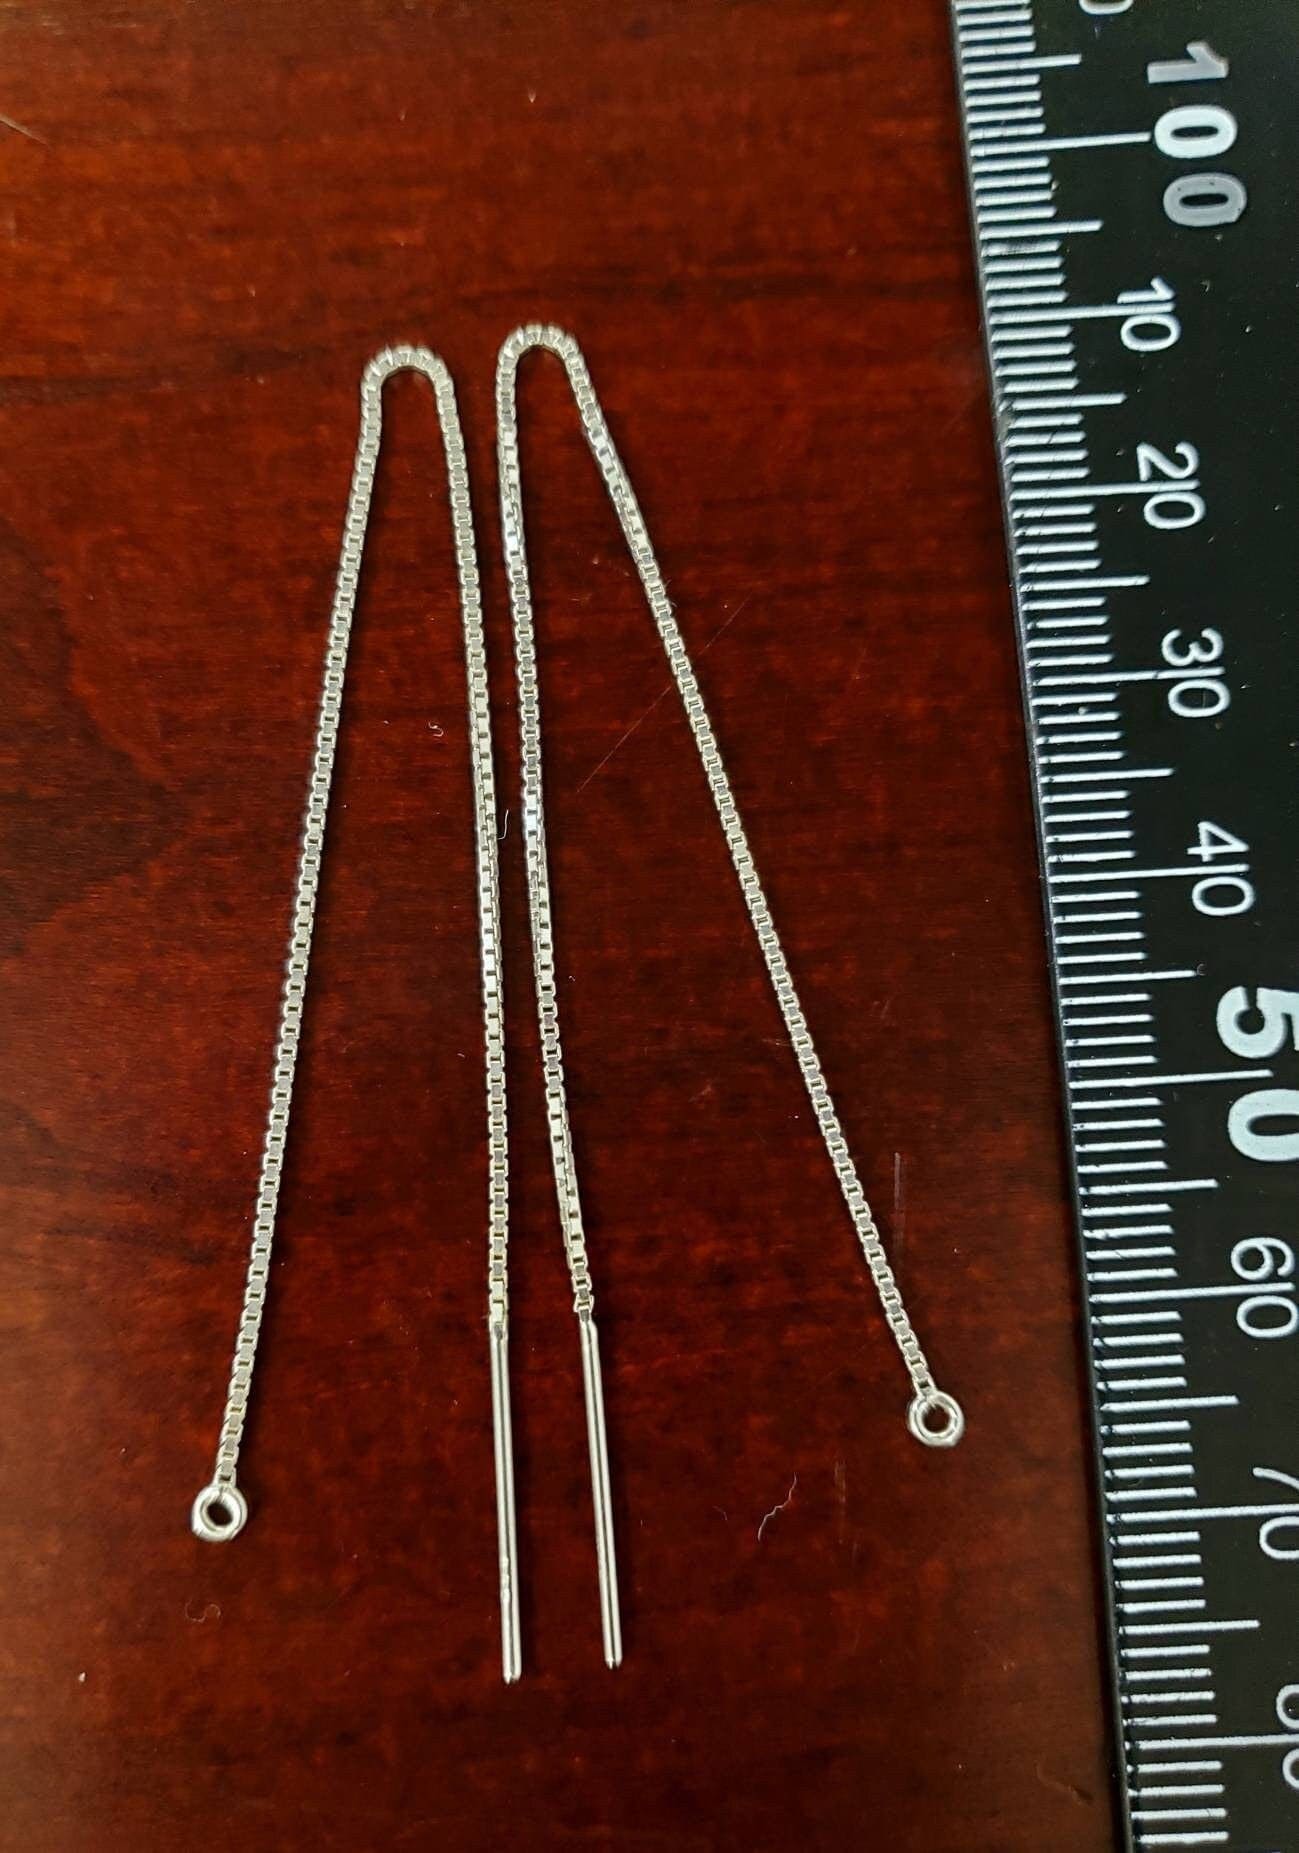 925 sterling silver 5&quot; , 127mm long box chain ear thread,high quality threader earwire,jewelry making findings.925 stamped,1 pair (2 pieces)